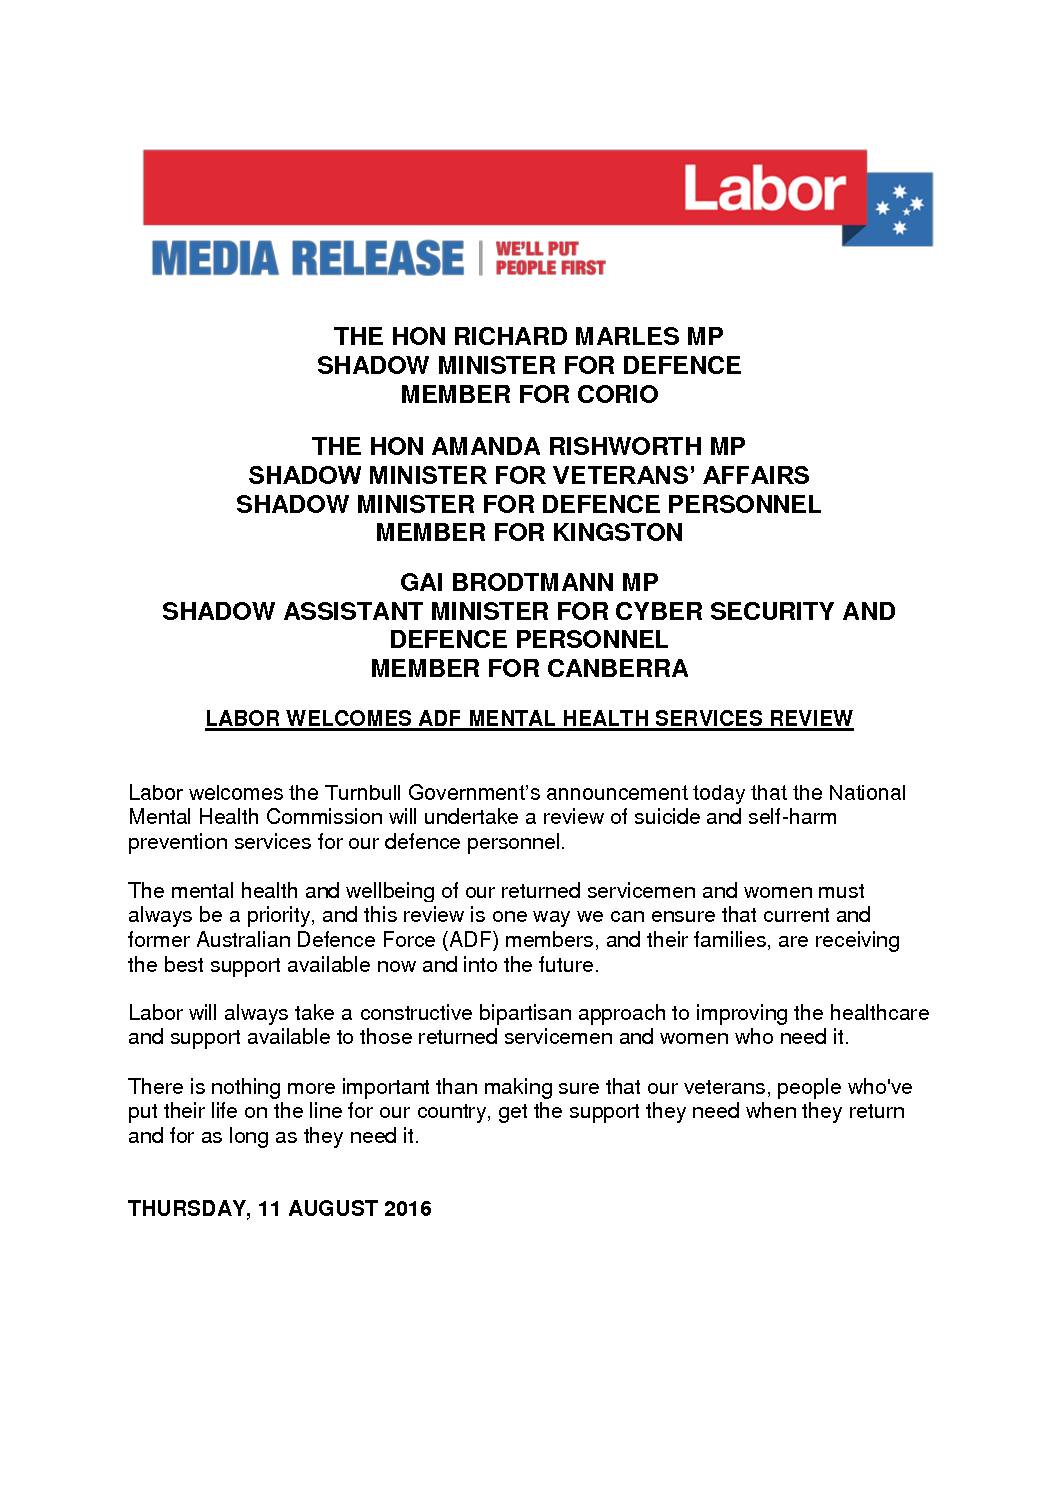 16.08.11 LABOR WELCOMES ADF MENTAL HEALTH SERVICES REVIEW